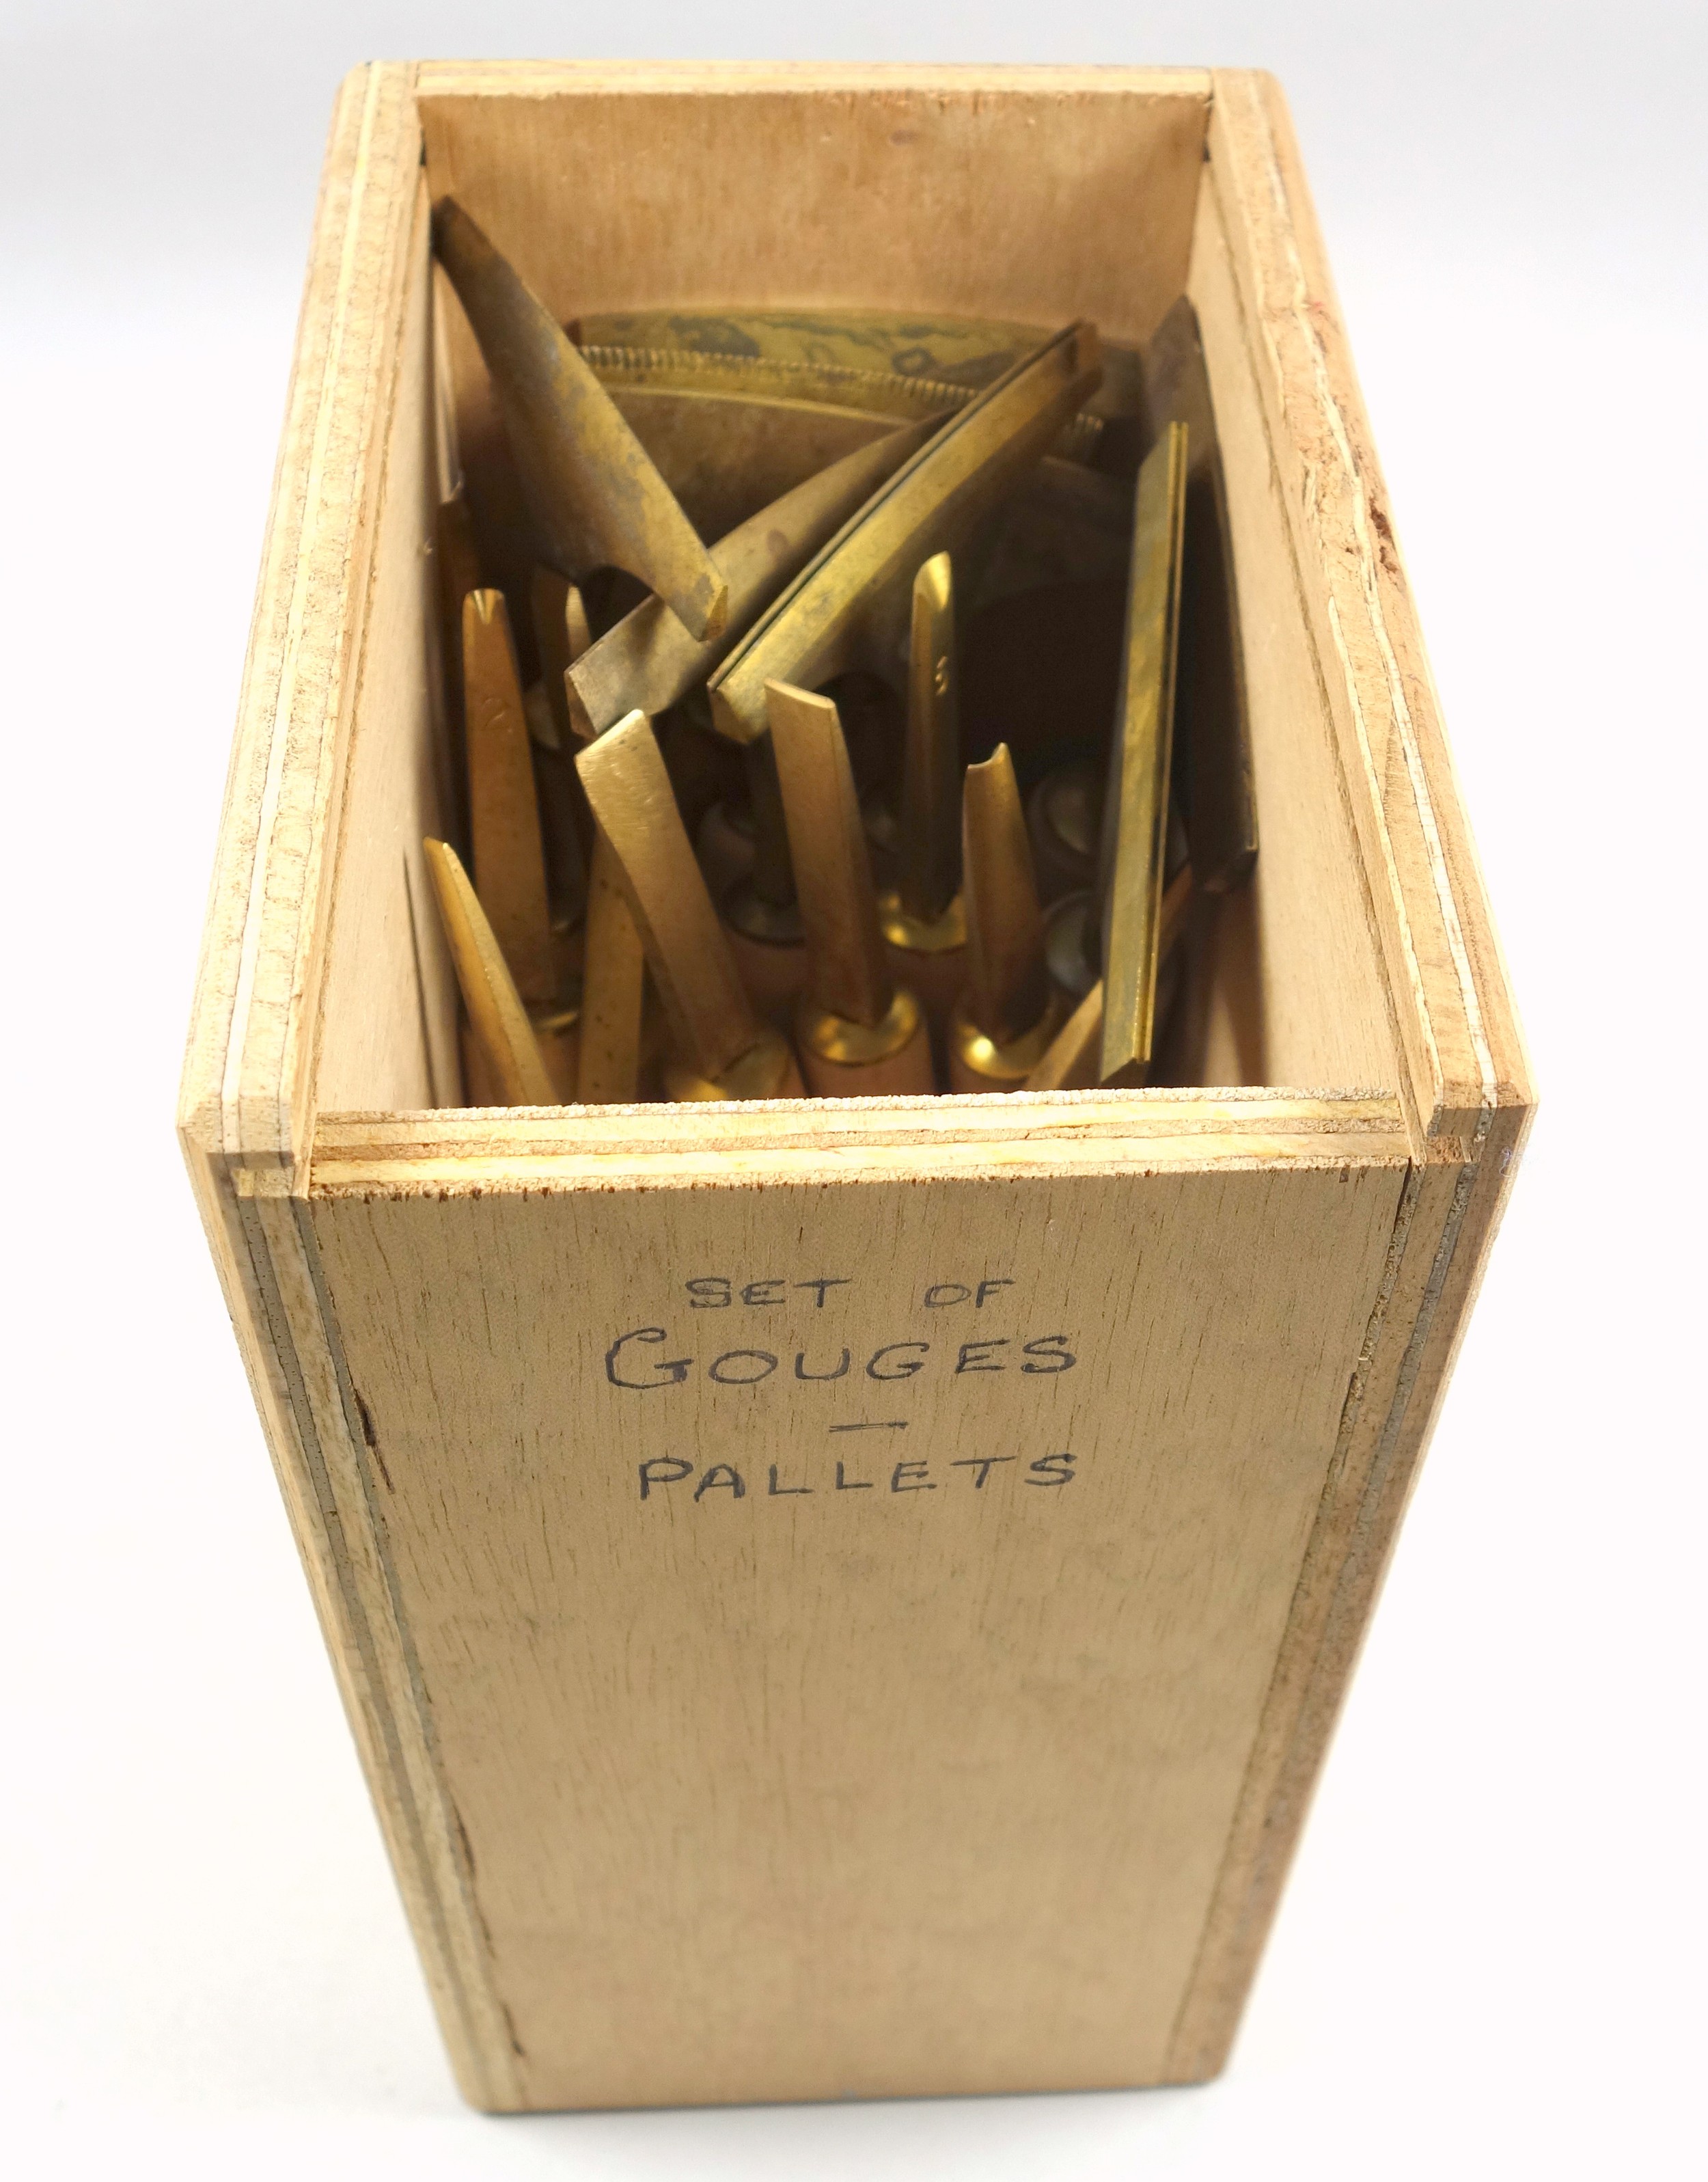 20 gold finishing hand tools comprising 12 gouges and 8 decorative and other pallets. (2)